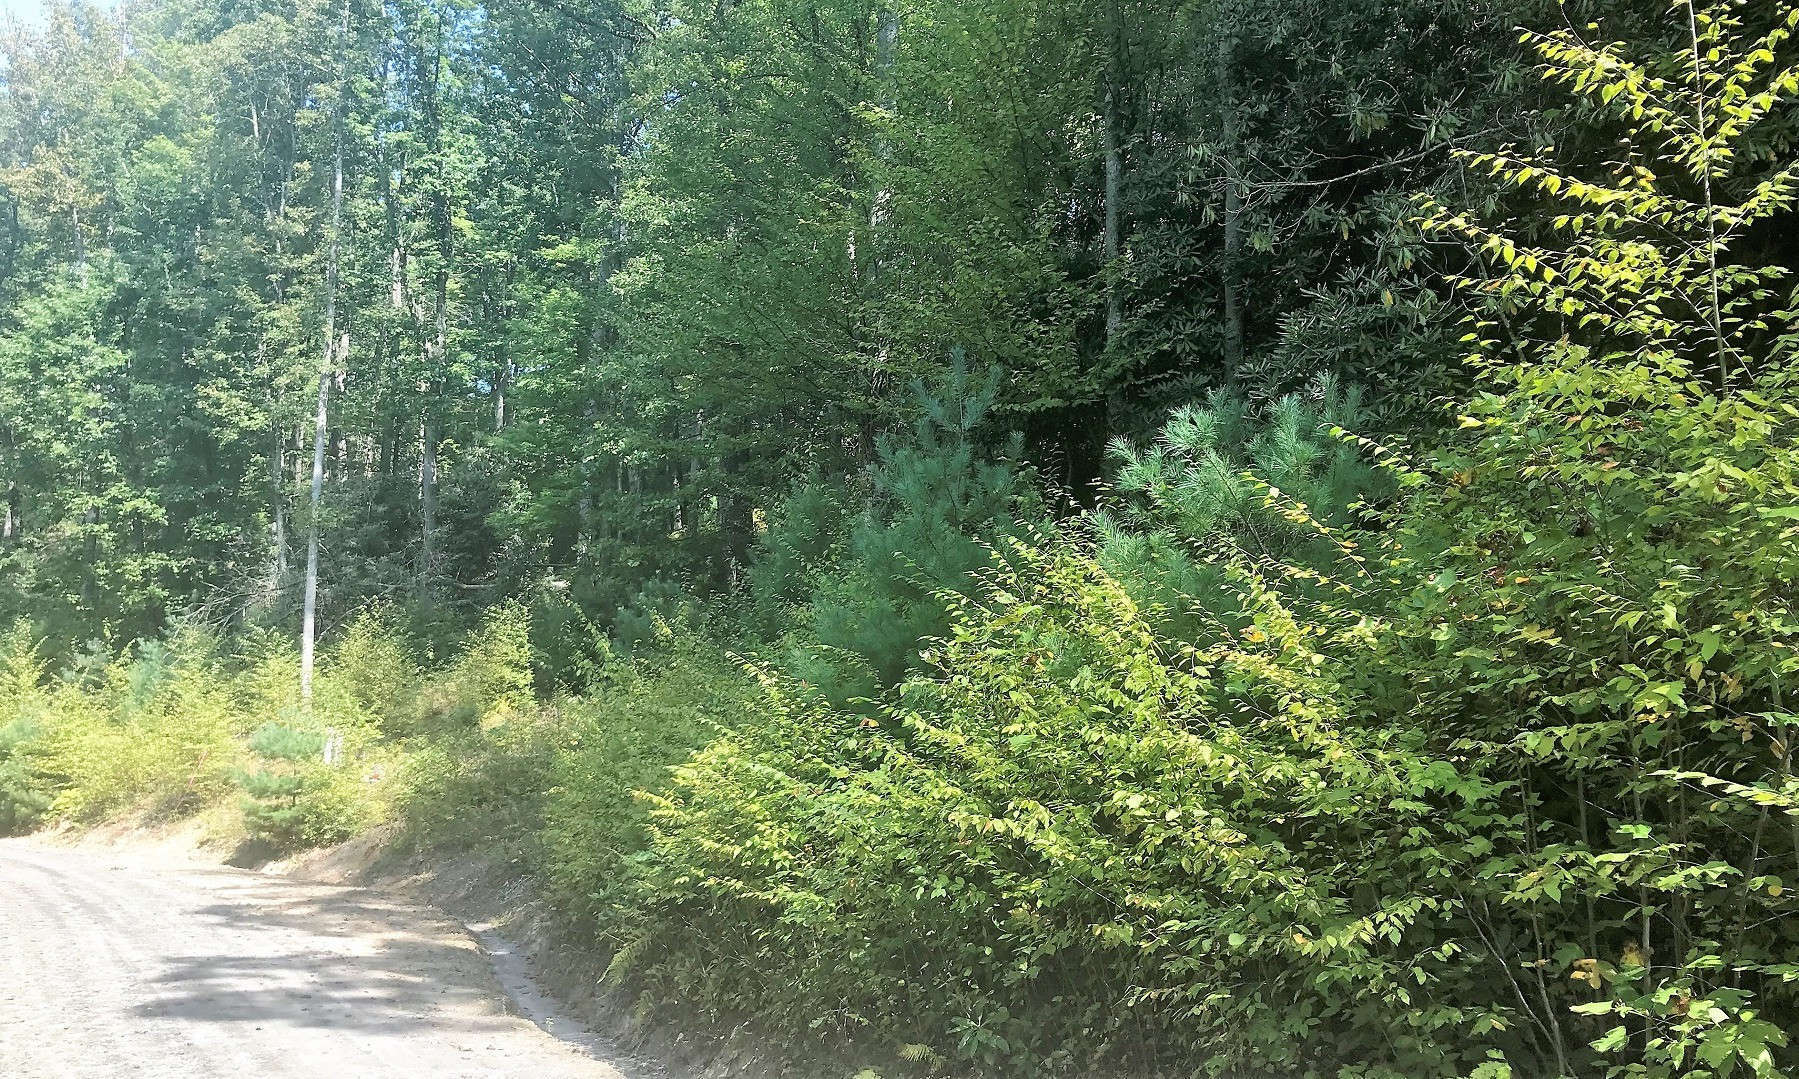 If you are looking for a nice lot to build your NC Mountain home or cabin, take a look at this beautifully wooded home site in Cedar Crossing, a well established community located in the Fleetwood area of Southern Ashe County.